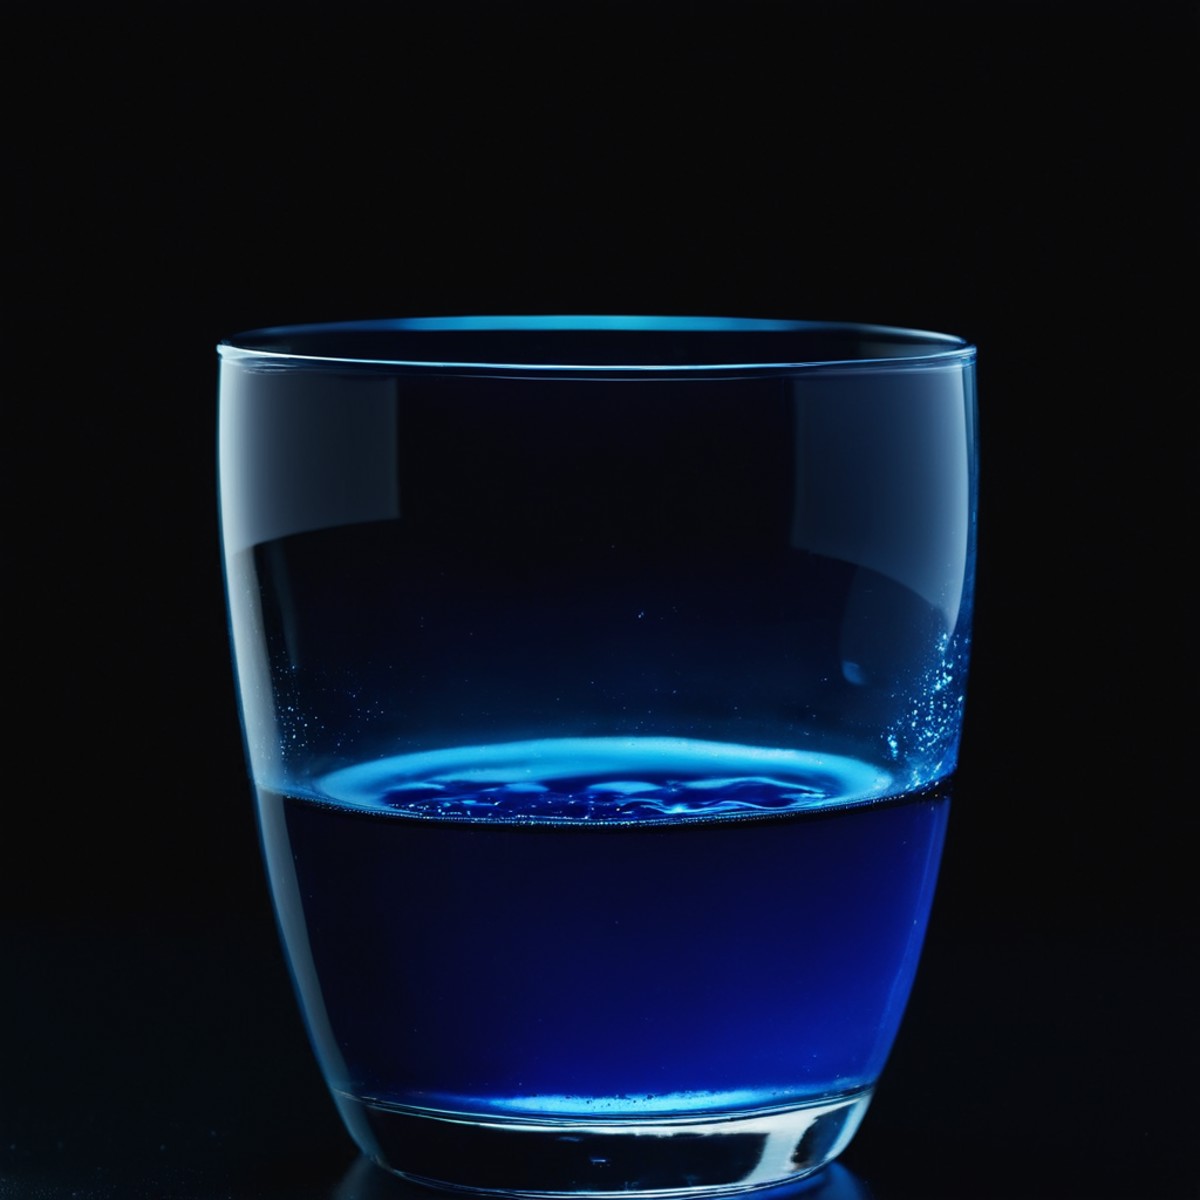 cinematic film still of  <lora:Ultraviolet lighting Style:1>
a blue liquid in a glass with a black background Ultraviolet ...